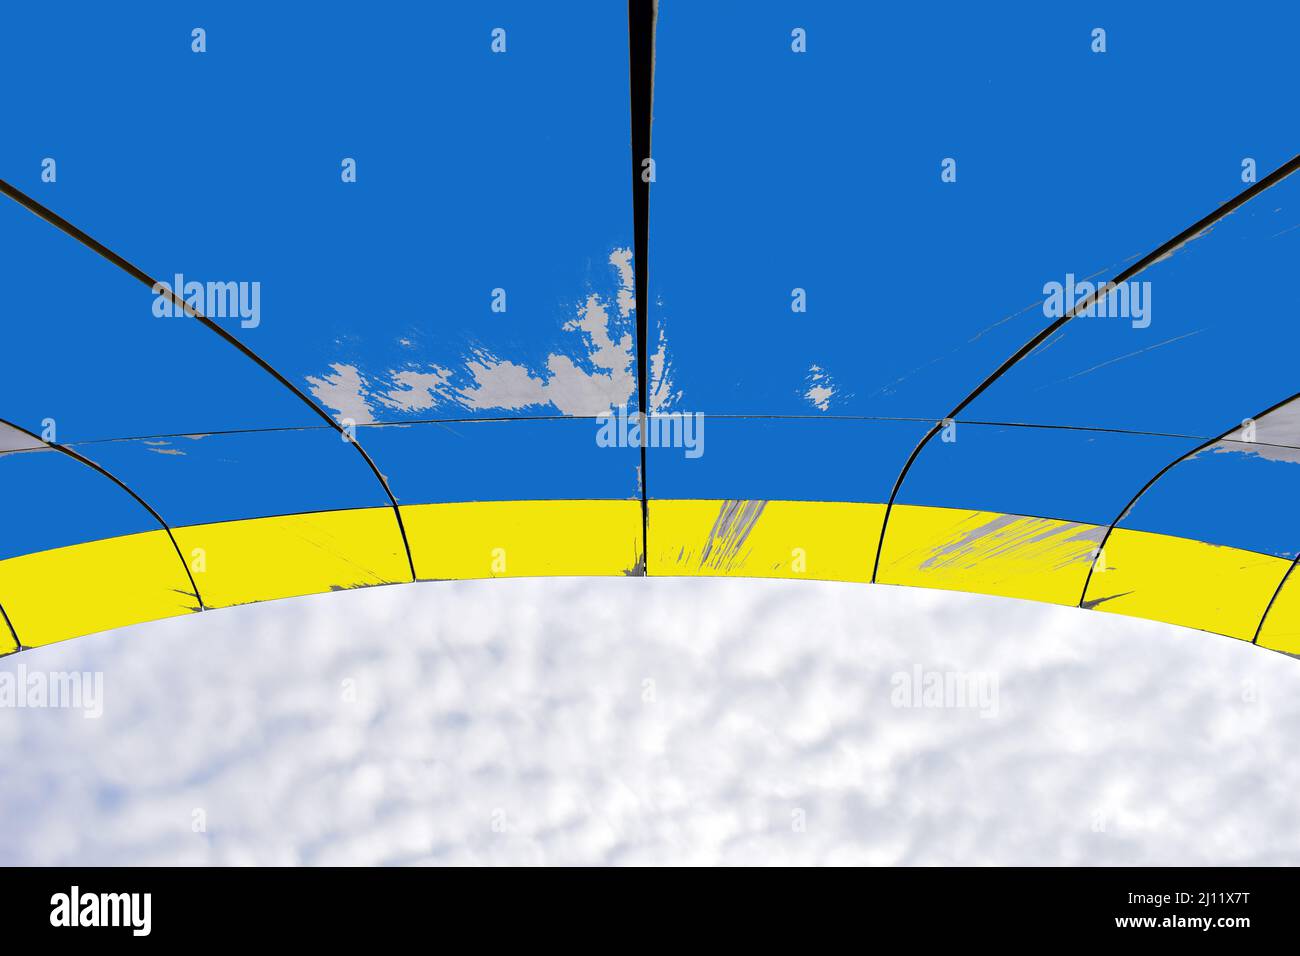 Abstract Ukraine country flag with caption on the photo Stock Photo